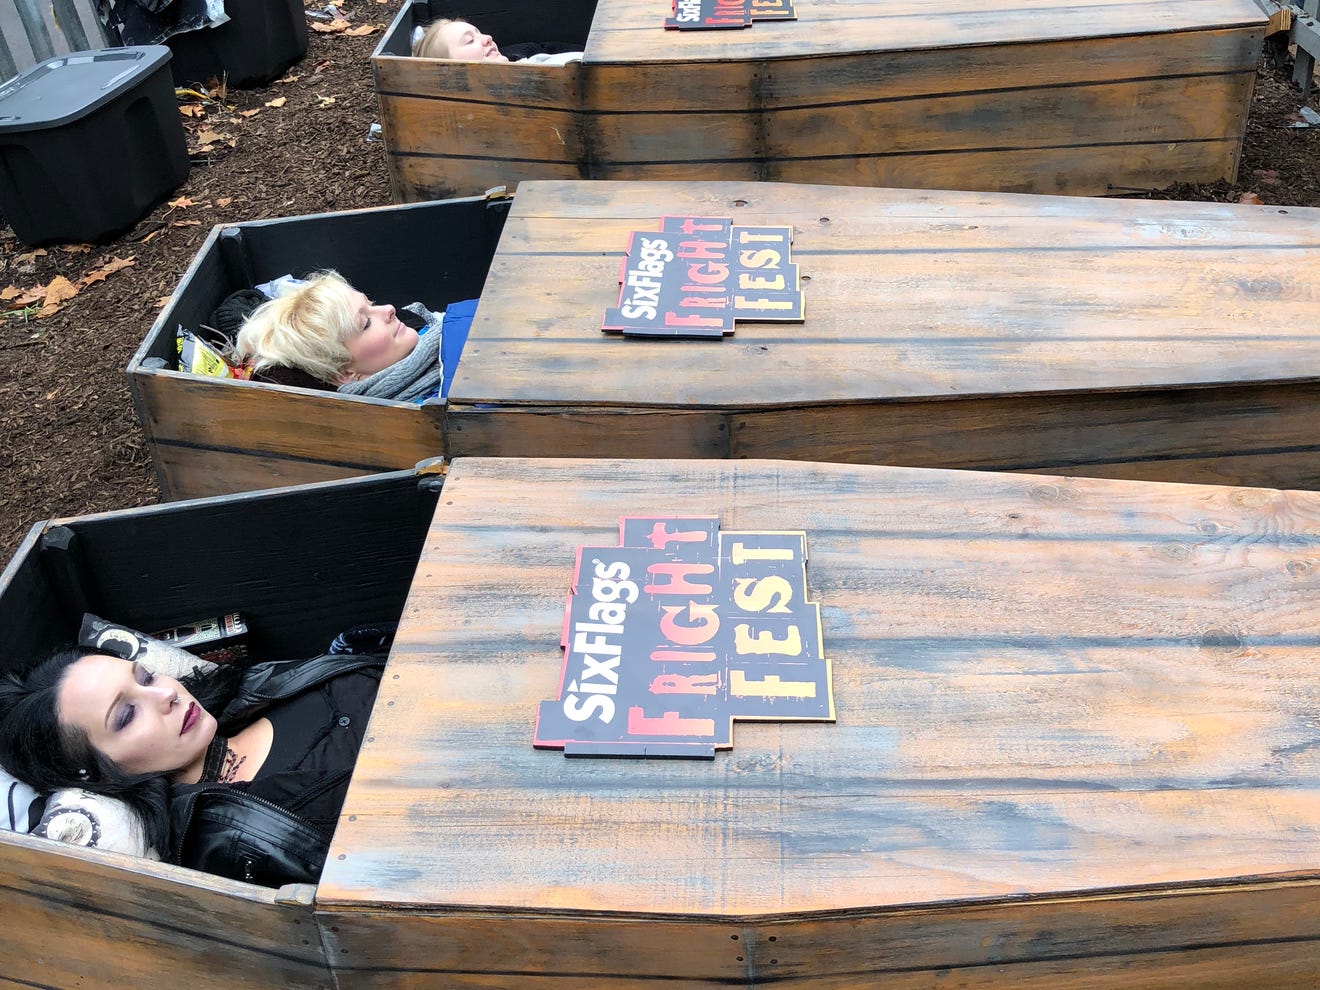 Contestants spend 30 hours in coffins during Fright Fest at Six Flags in St. Louis, Missouri. 